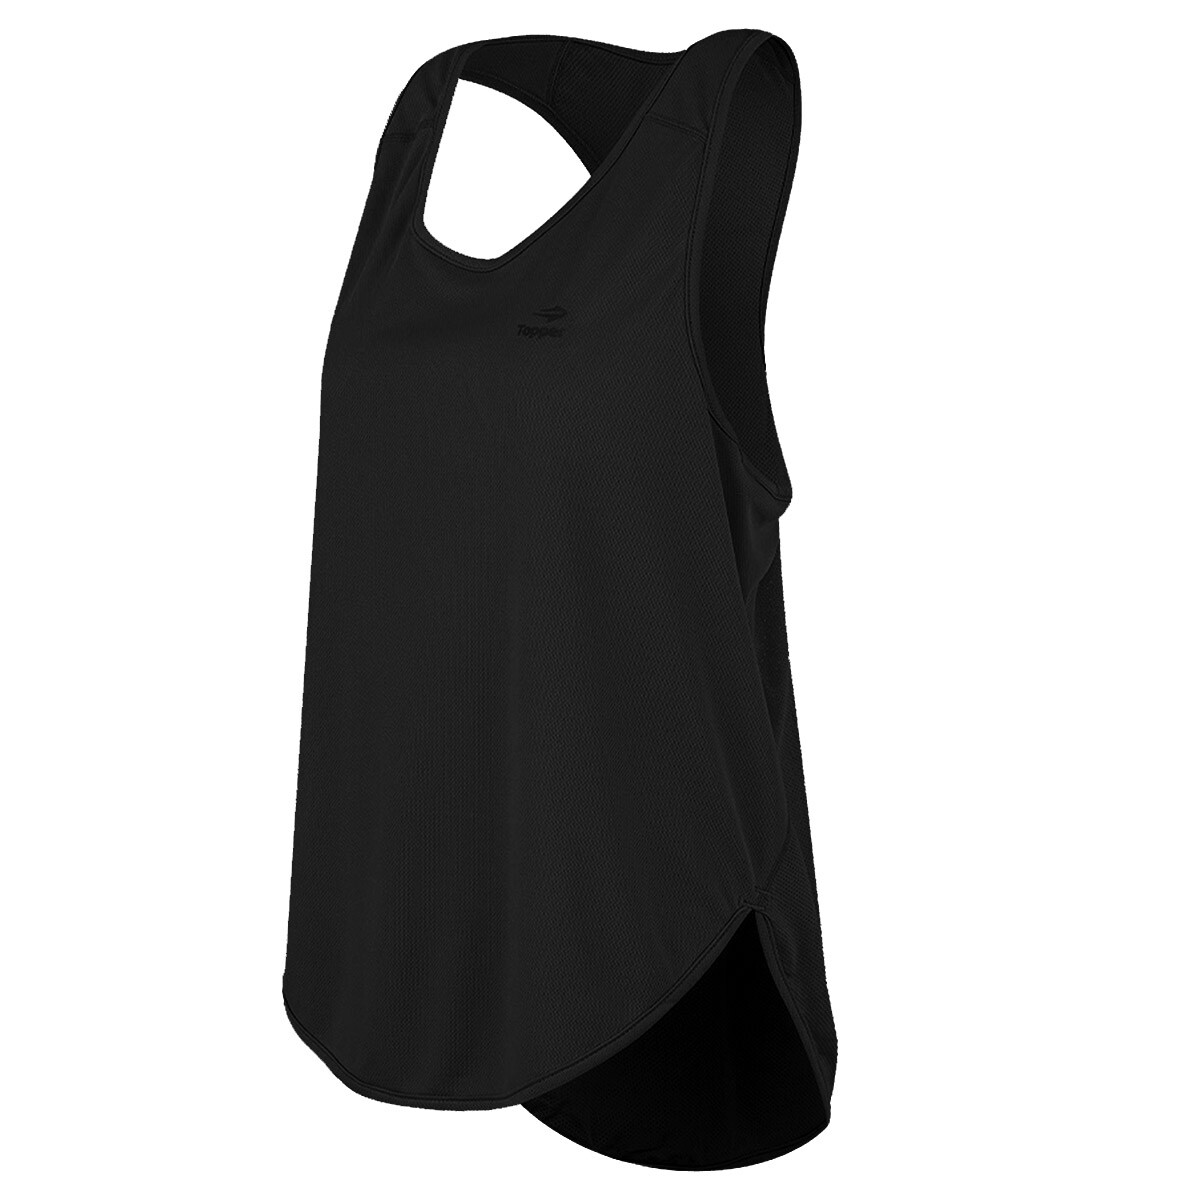 Musculosa Deportiva Topper Trainning Para Mujer 